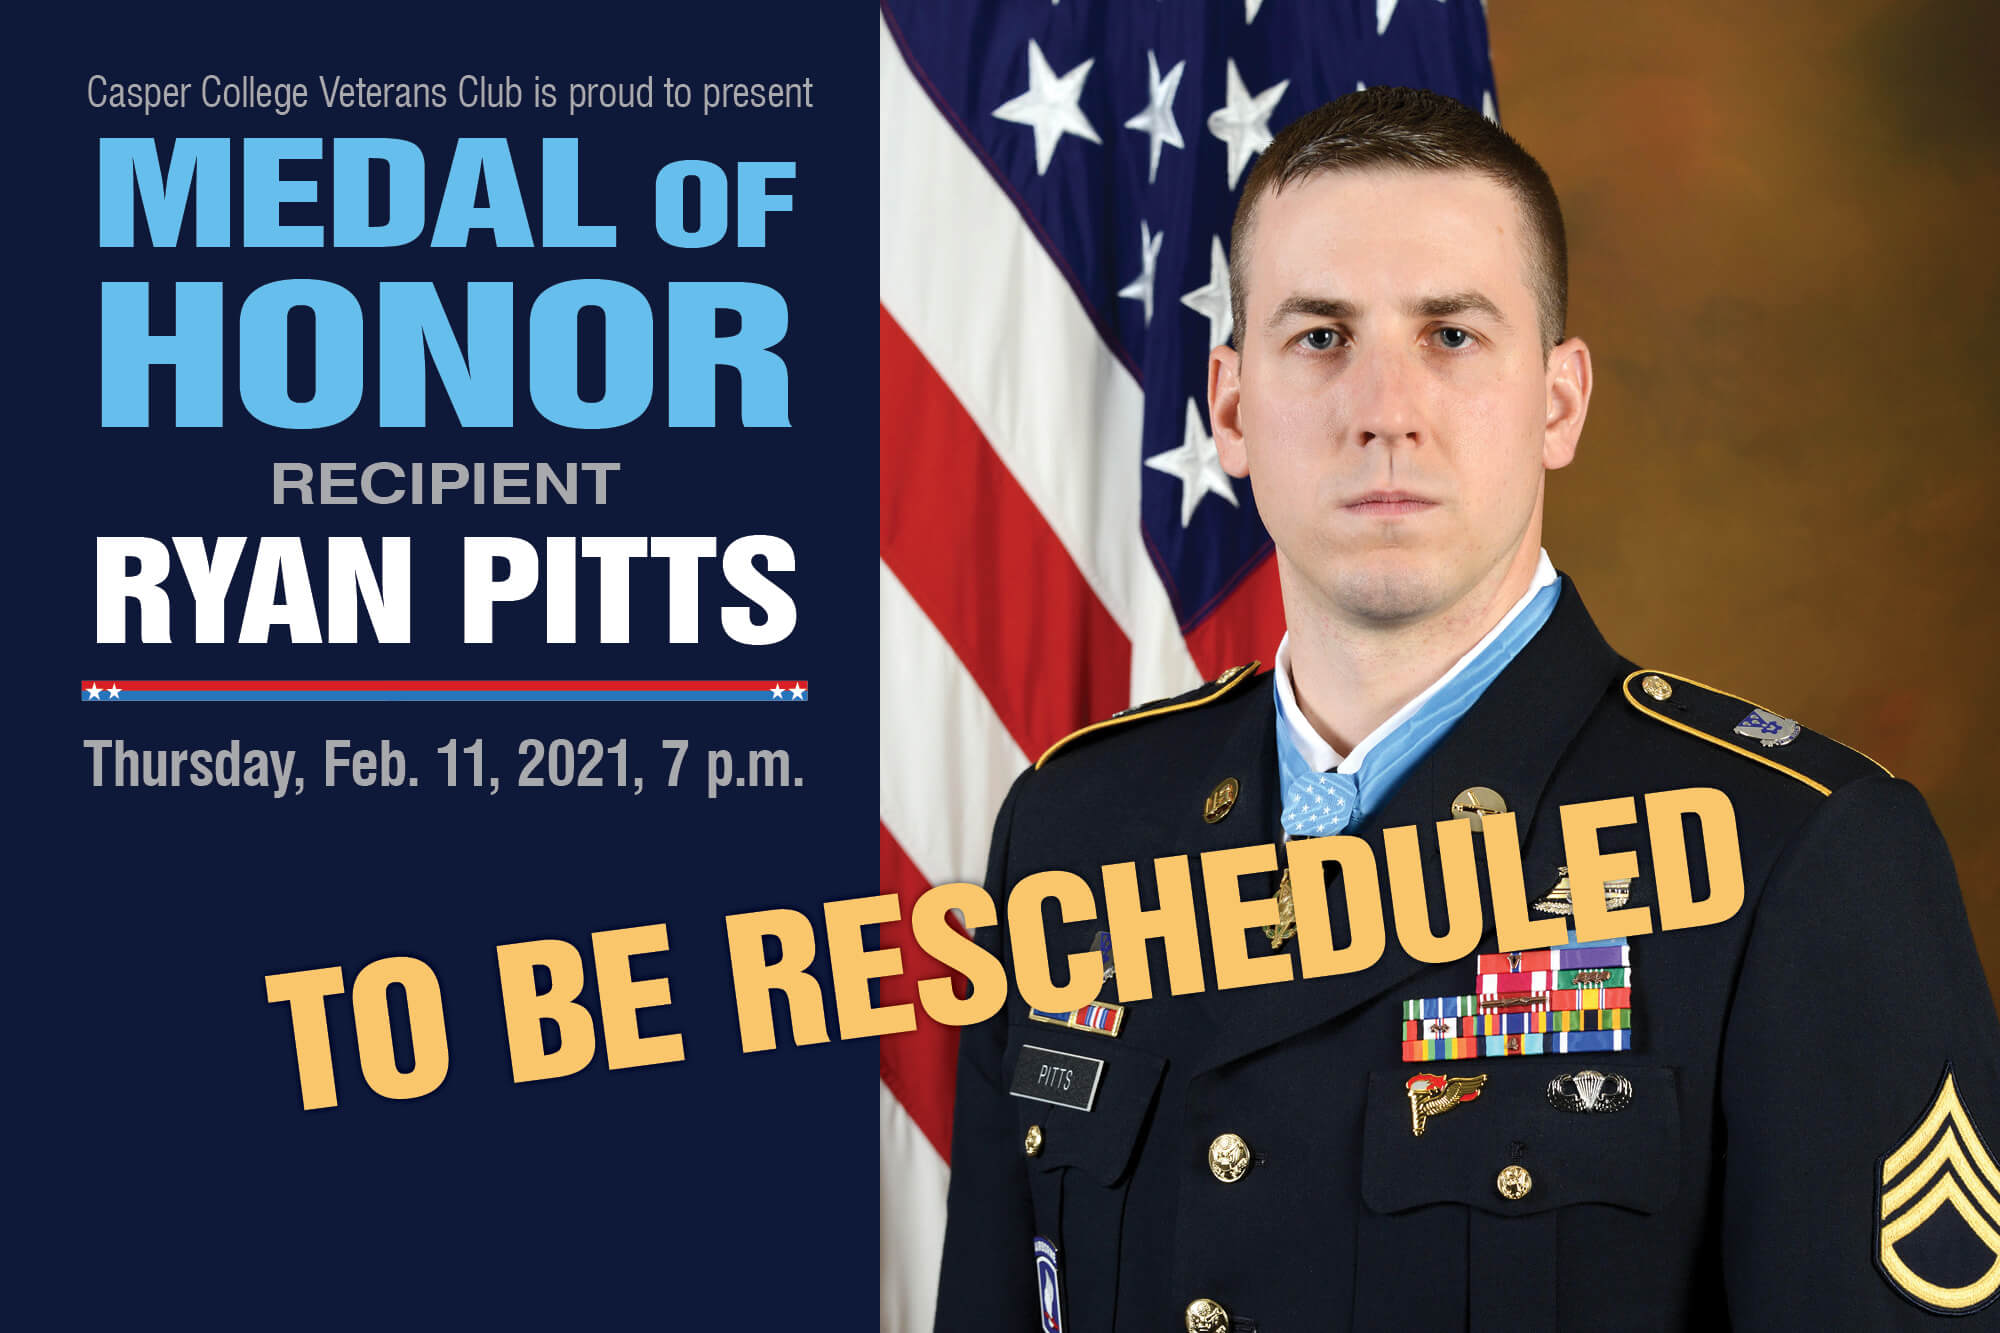 Photo of Ryan Pitts with the words "To Be Rescheduled."